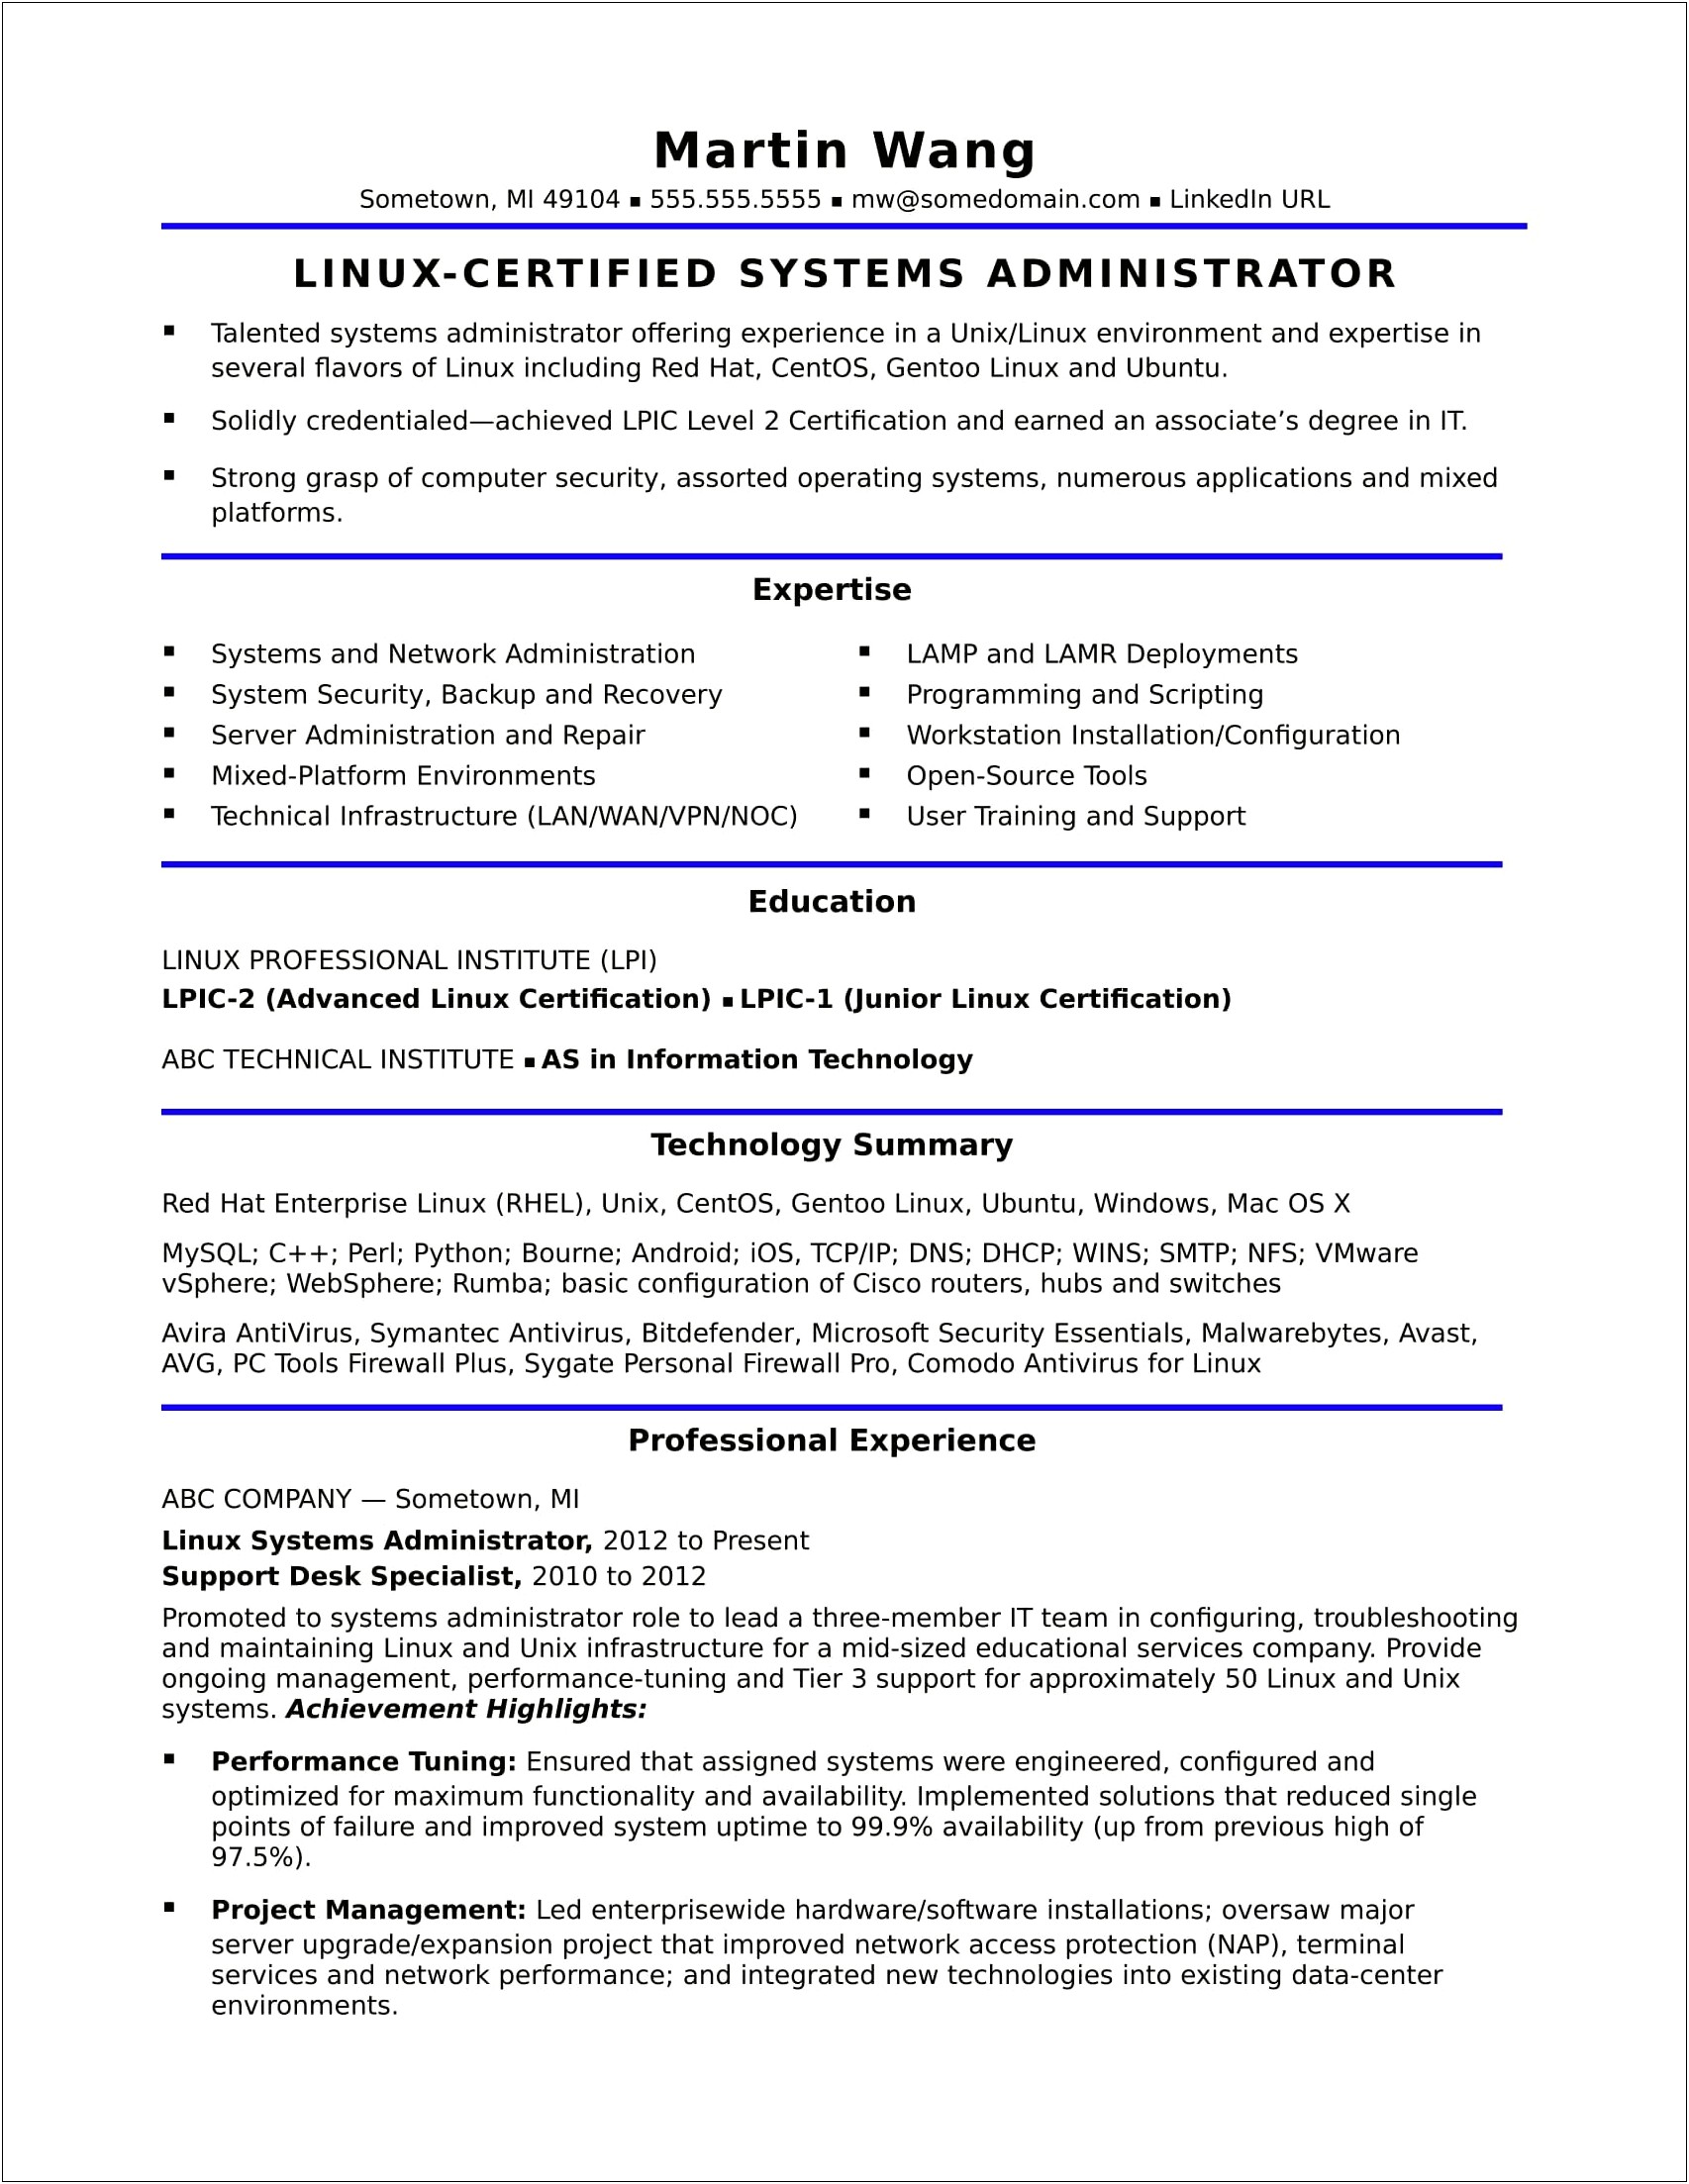 Best Resume Format For Experienced System Administrator